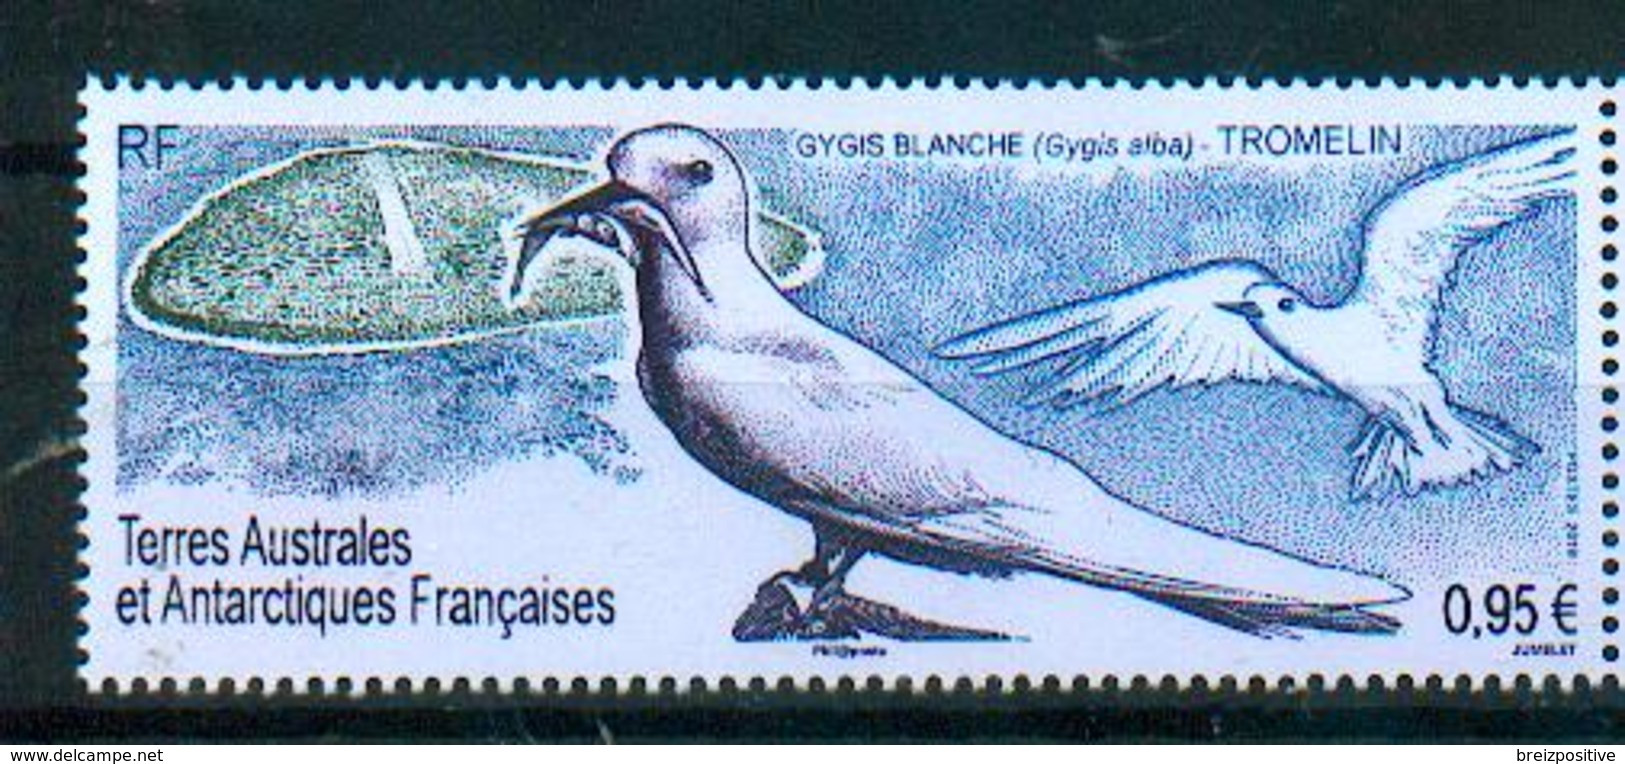 TAAF / French Southern Antarctic Territories 2019 - Gygis Blanche / White Tern / Gygis Alba - MNH - Meeuwen